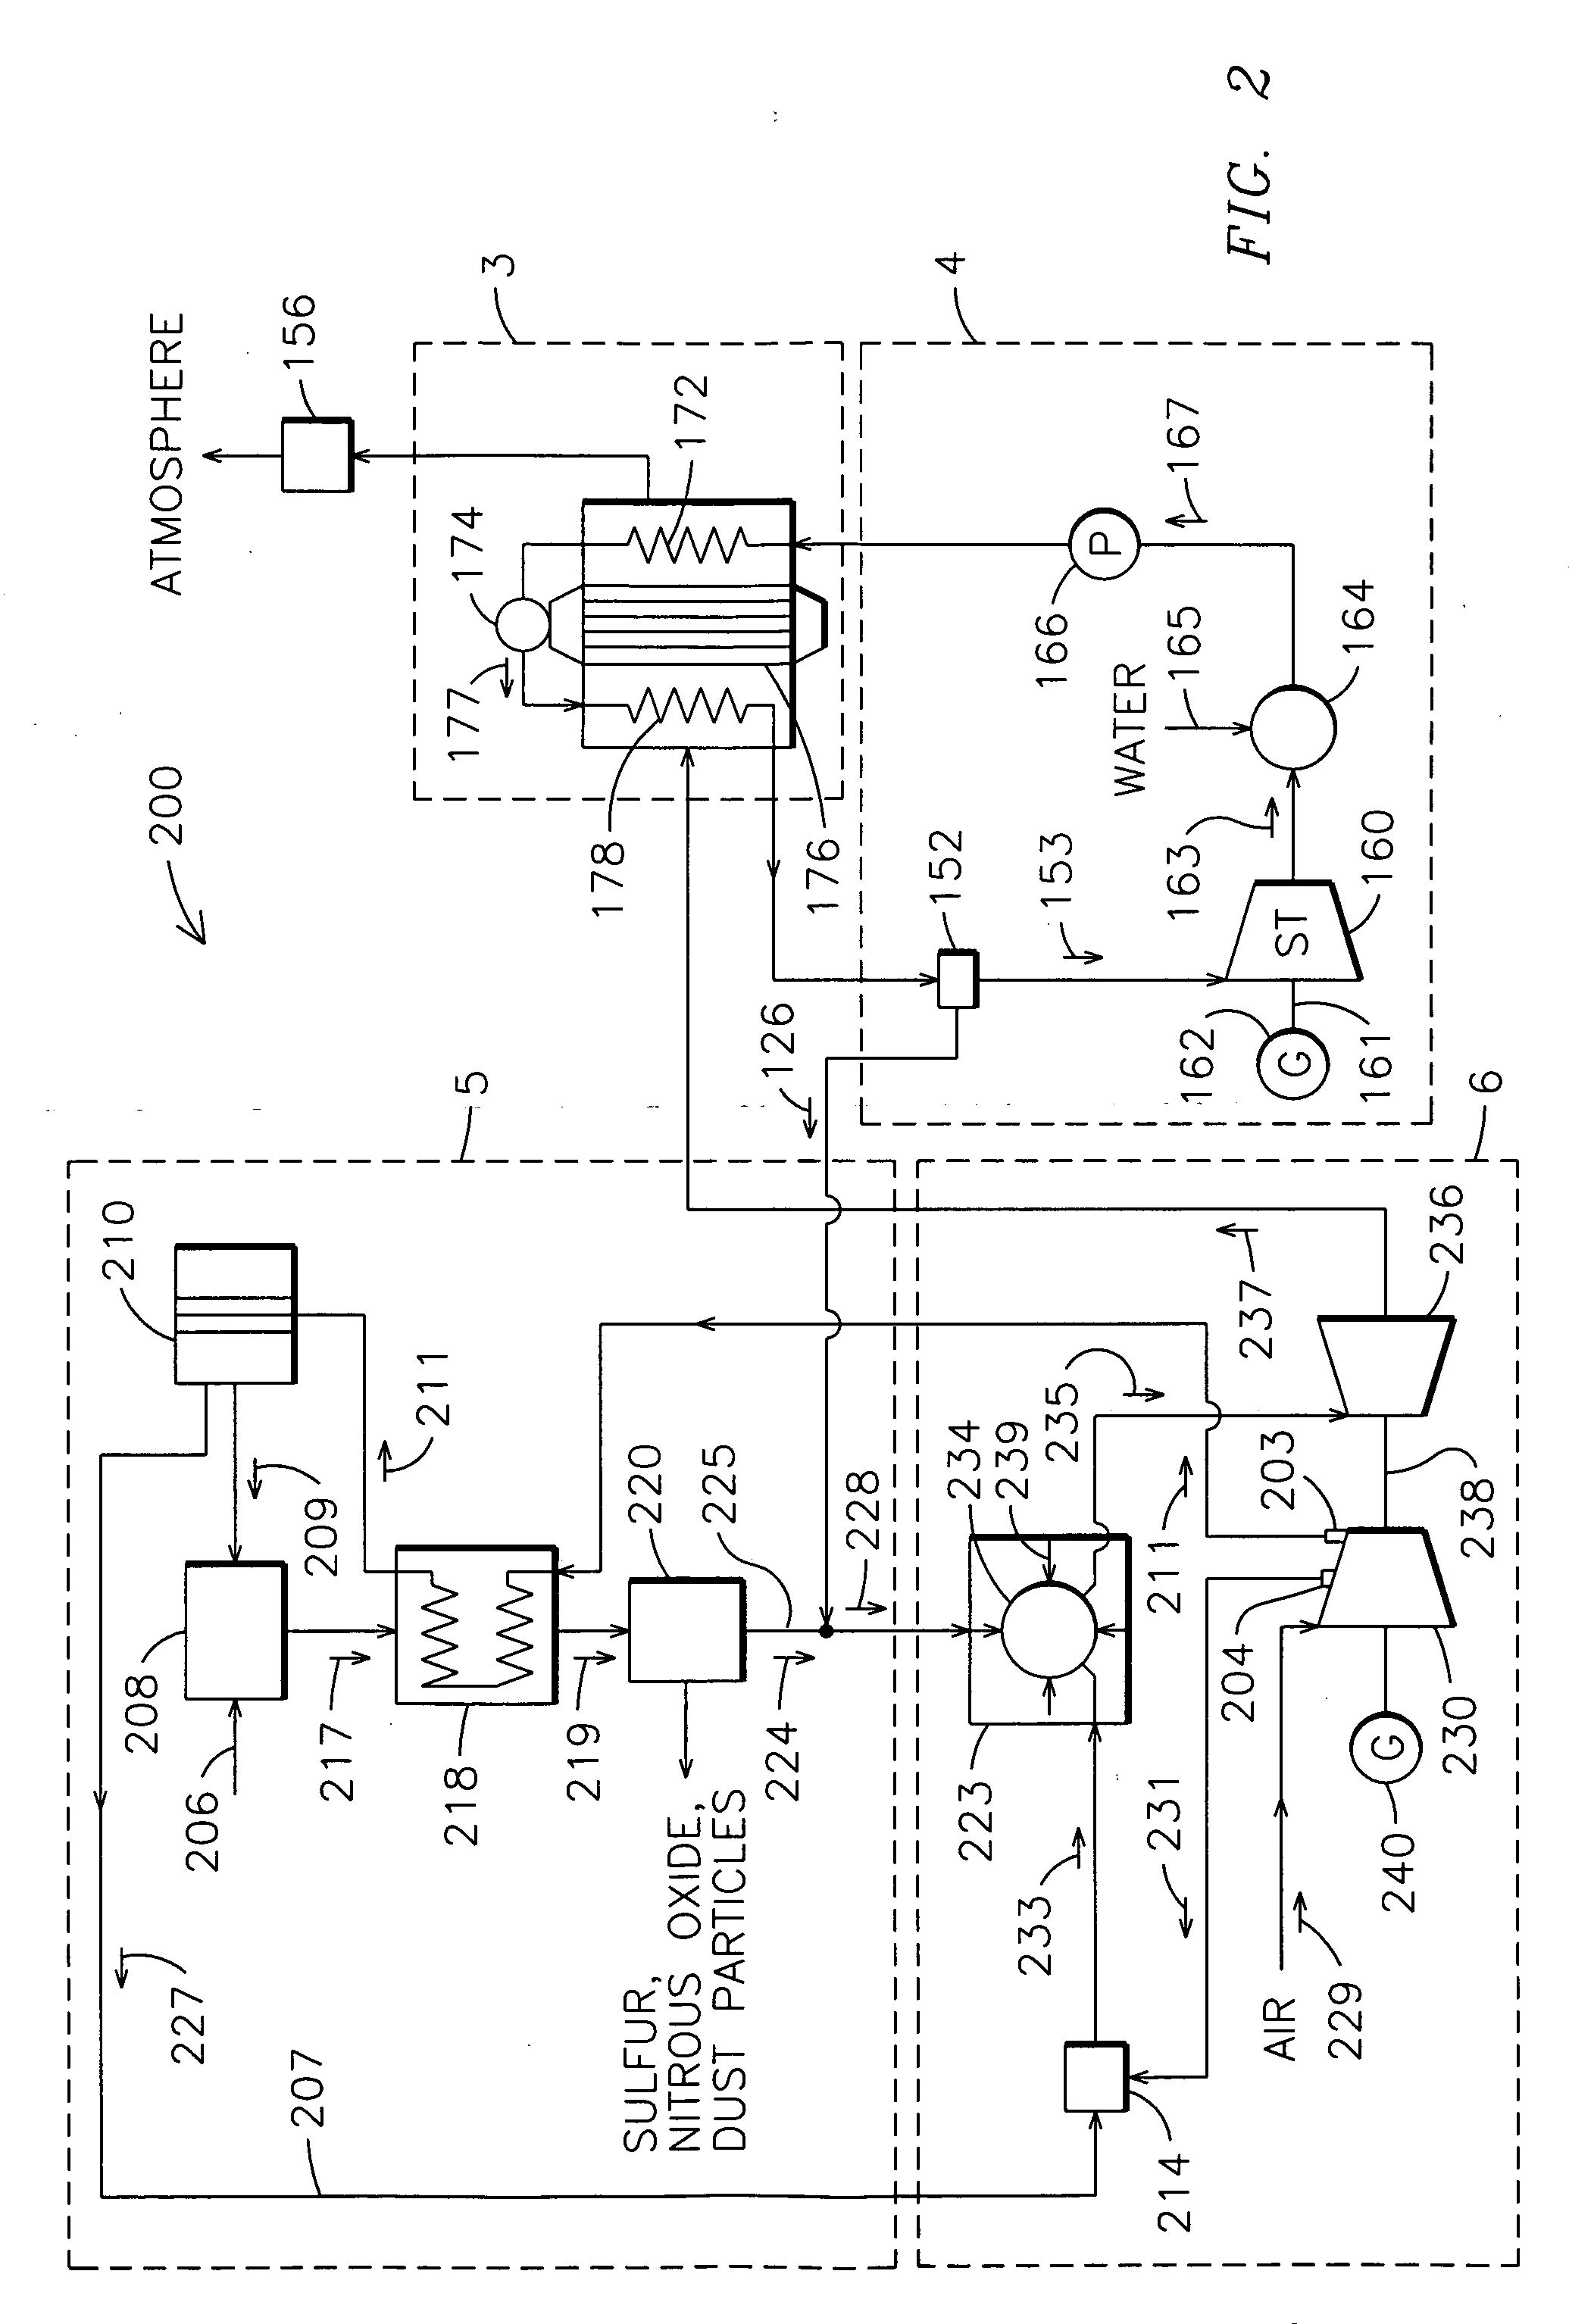 System and method for generation of high pressure air in an integrated gasification combined cycle system